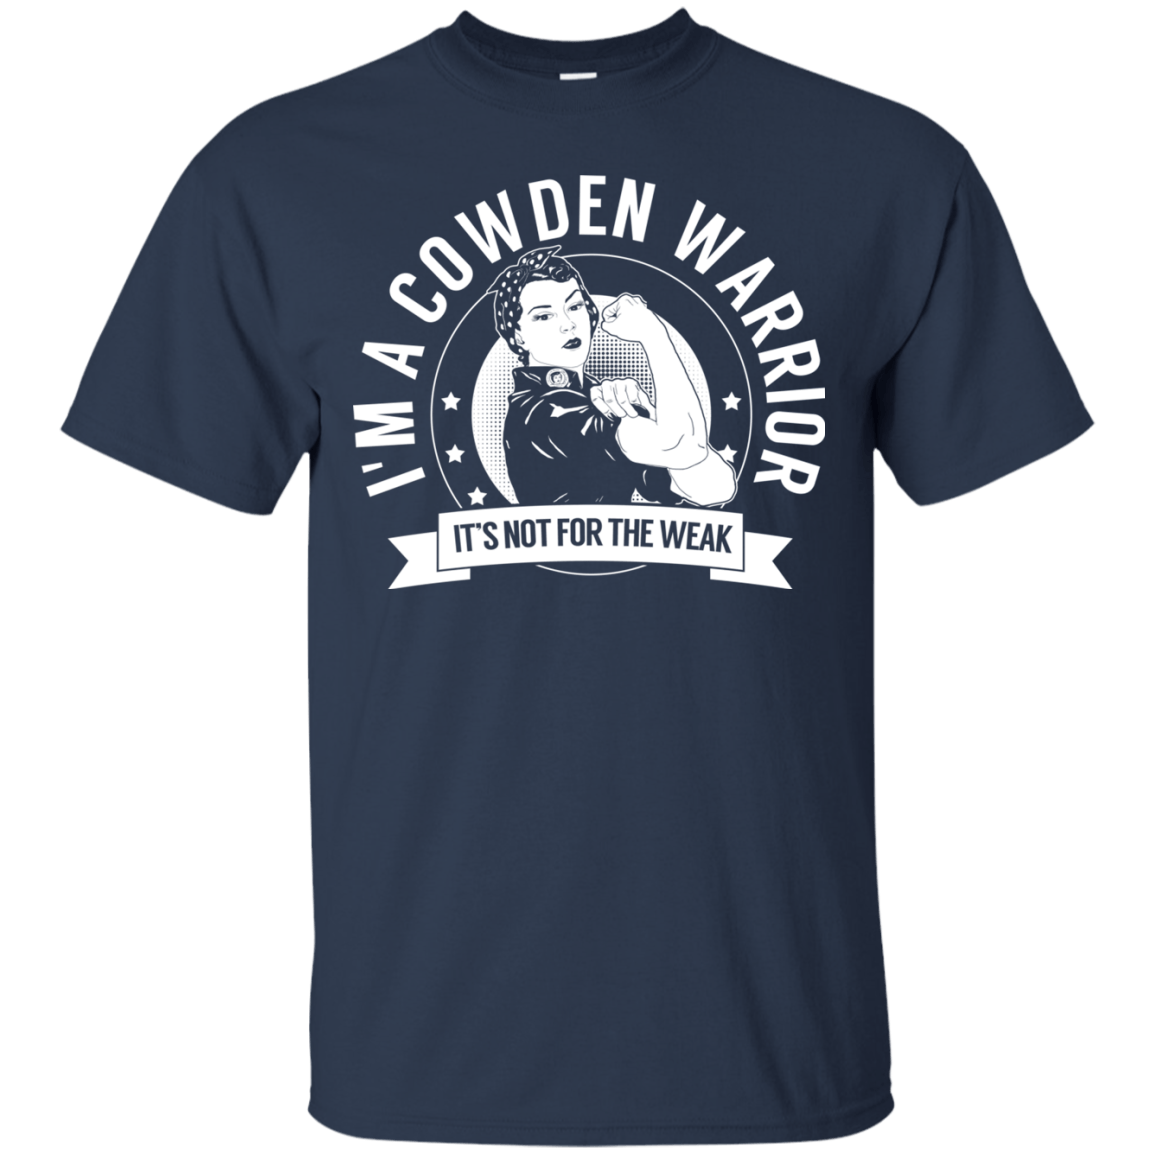 Cowden Syndrome - Cowden Warrior NFTW Unisex Shirt - The Unchargeables